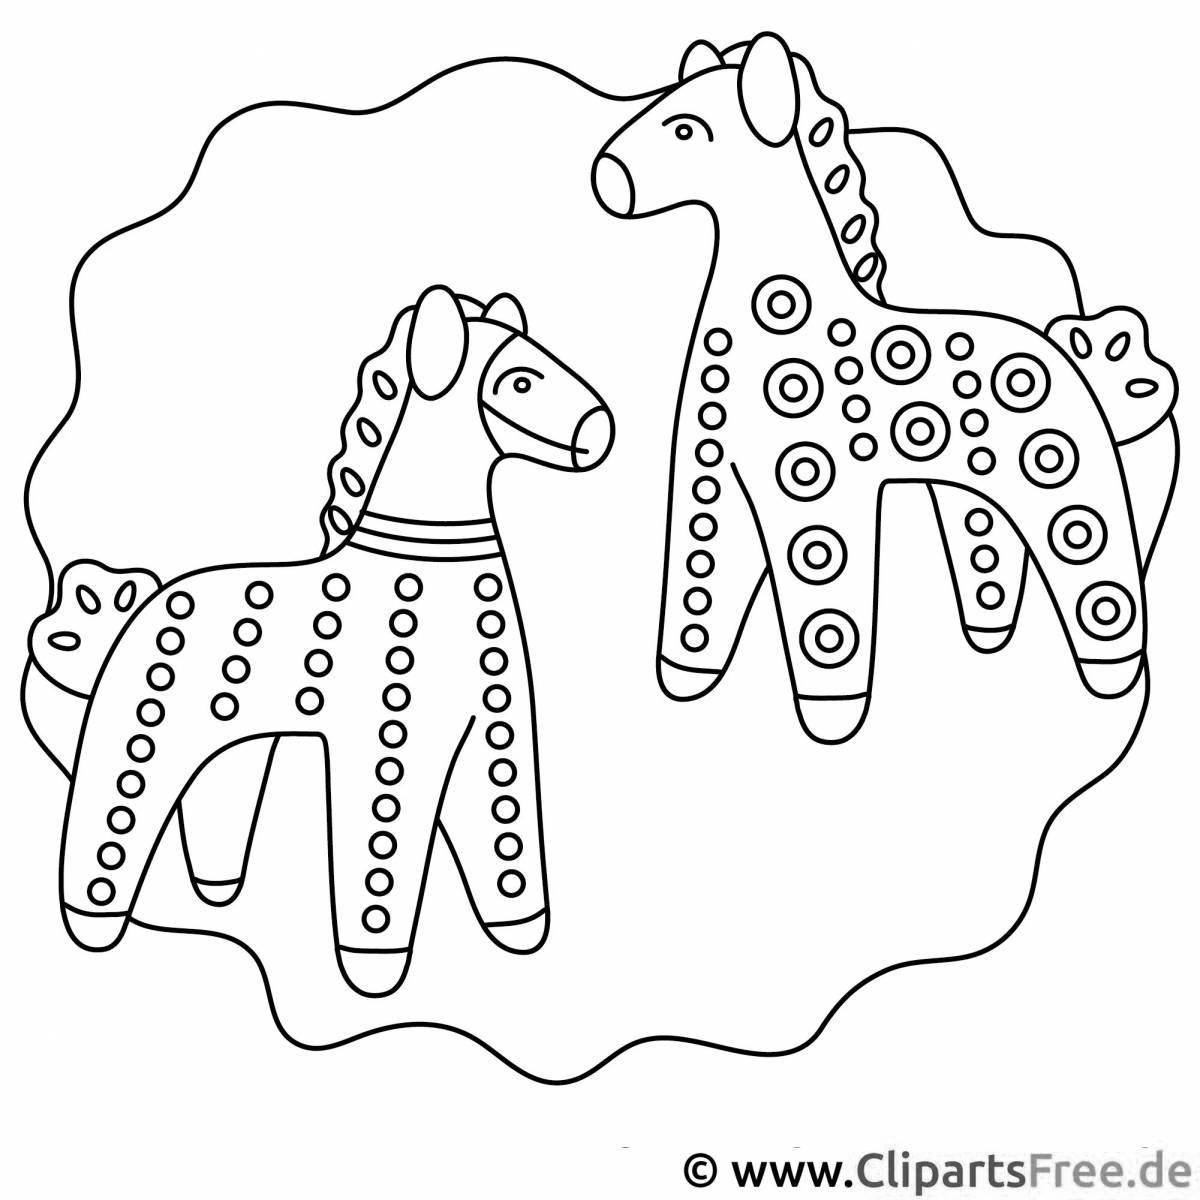 Dymkovo horse coloring pages for kids